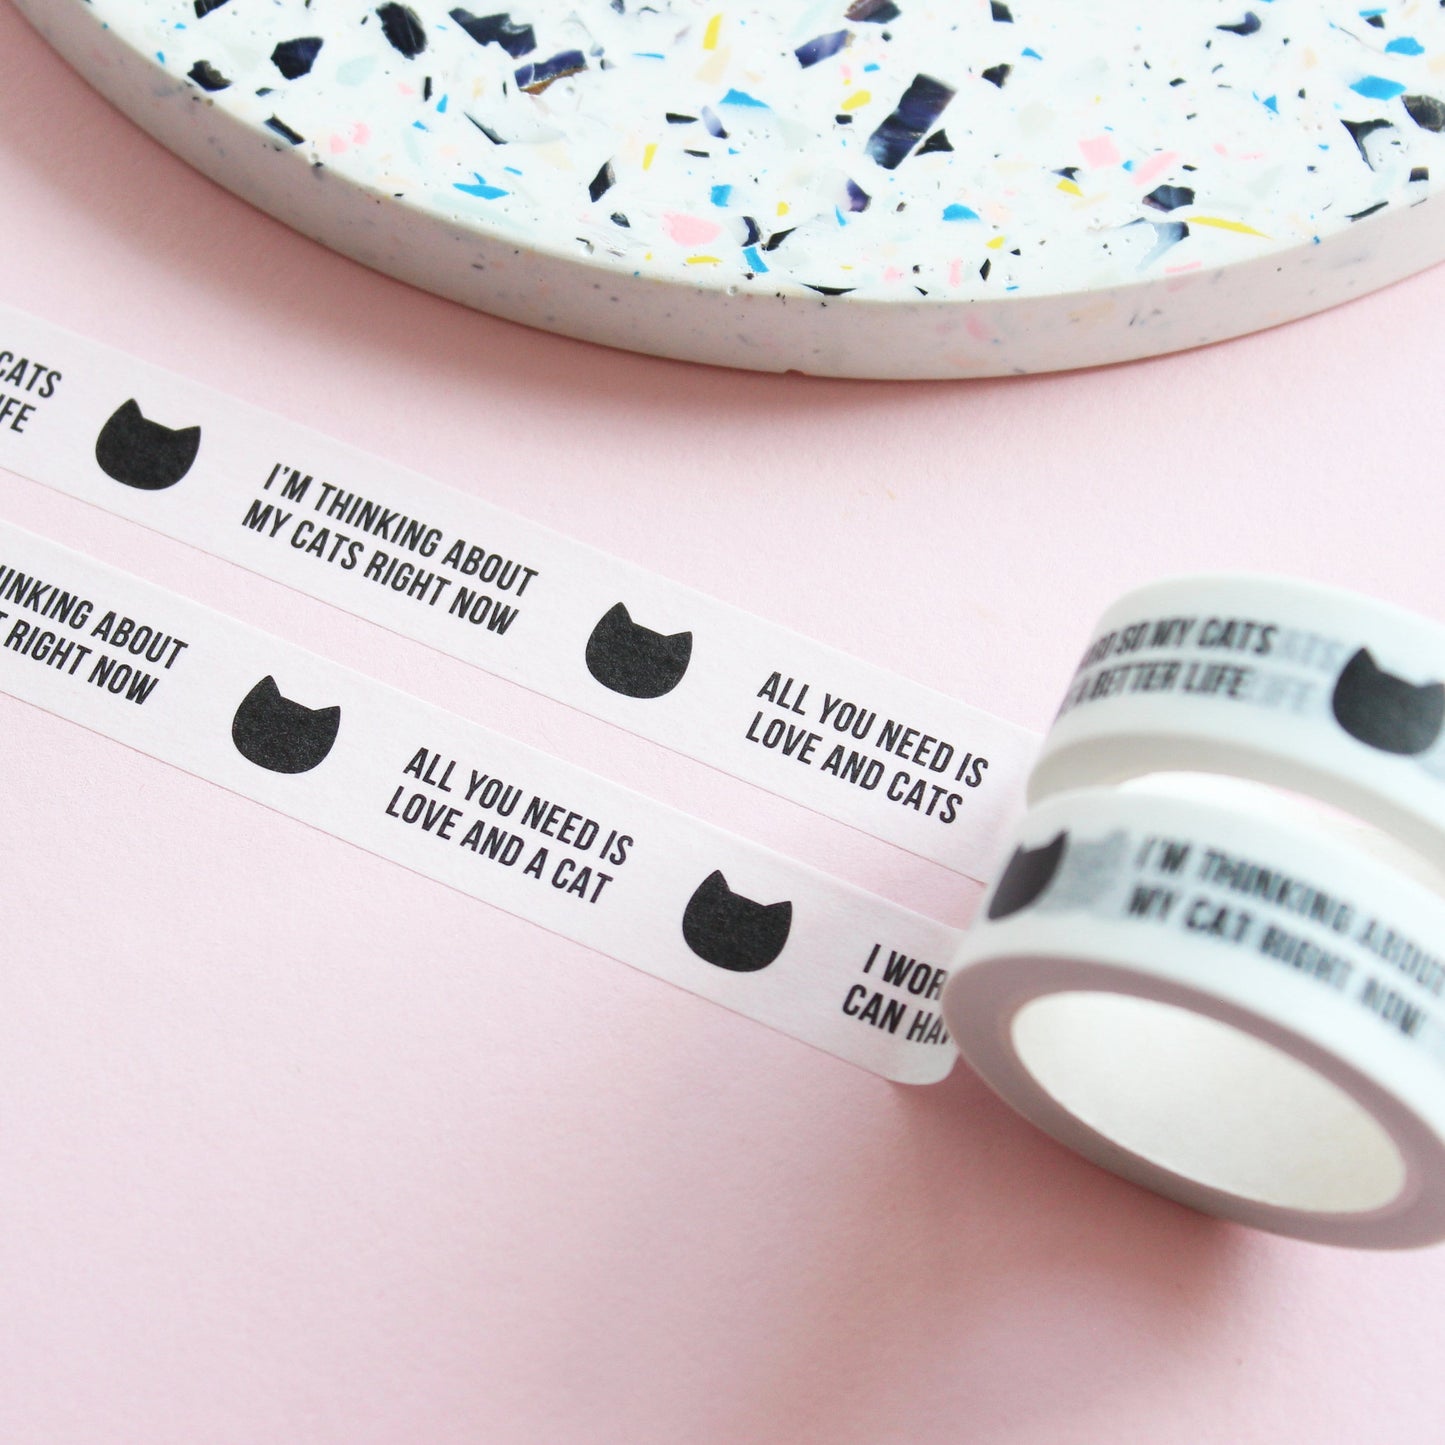 Funny cat washi tape from Purple Tree Designs